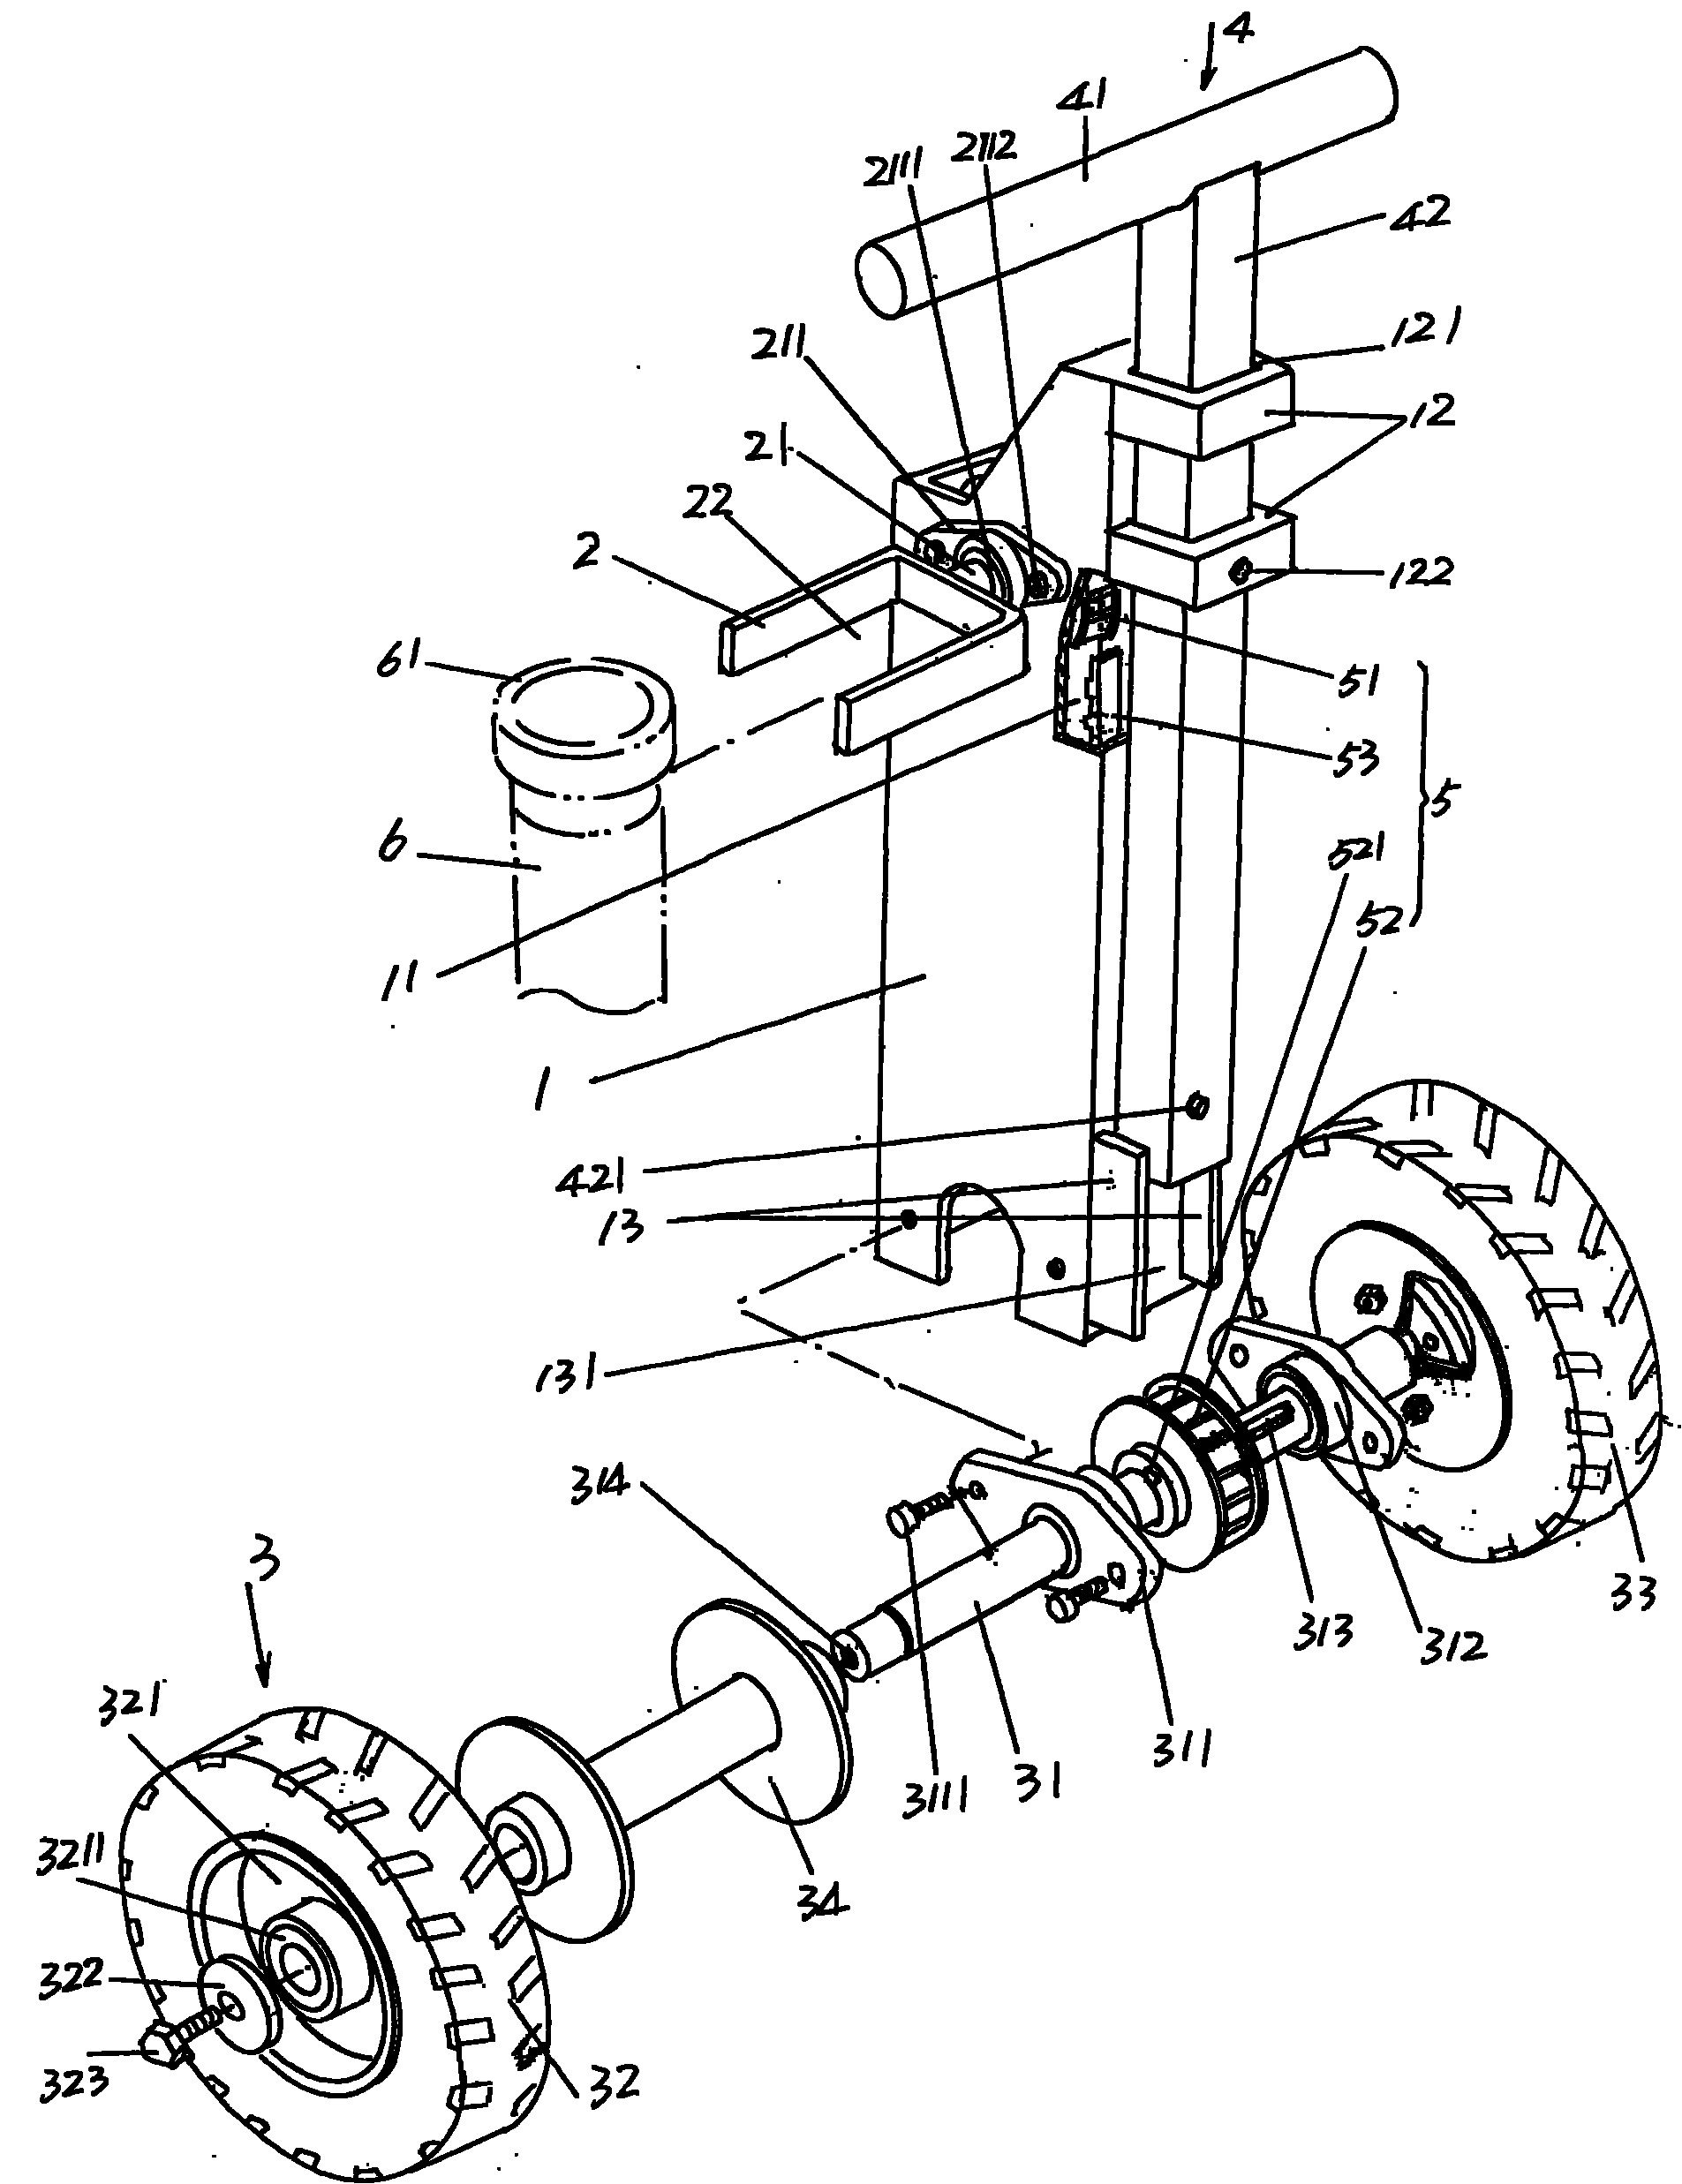 Handcart type fire hose recovery device